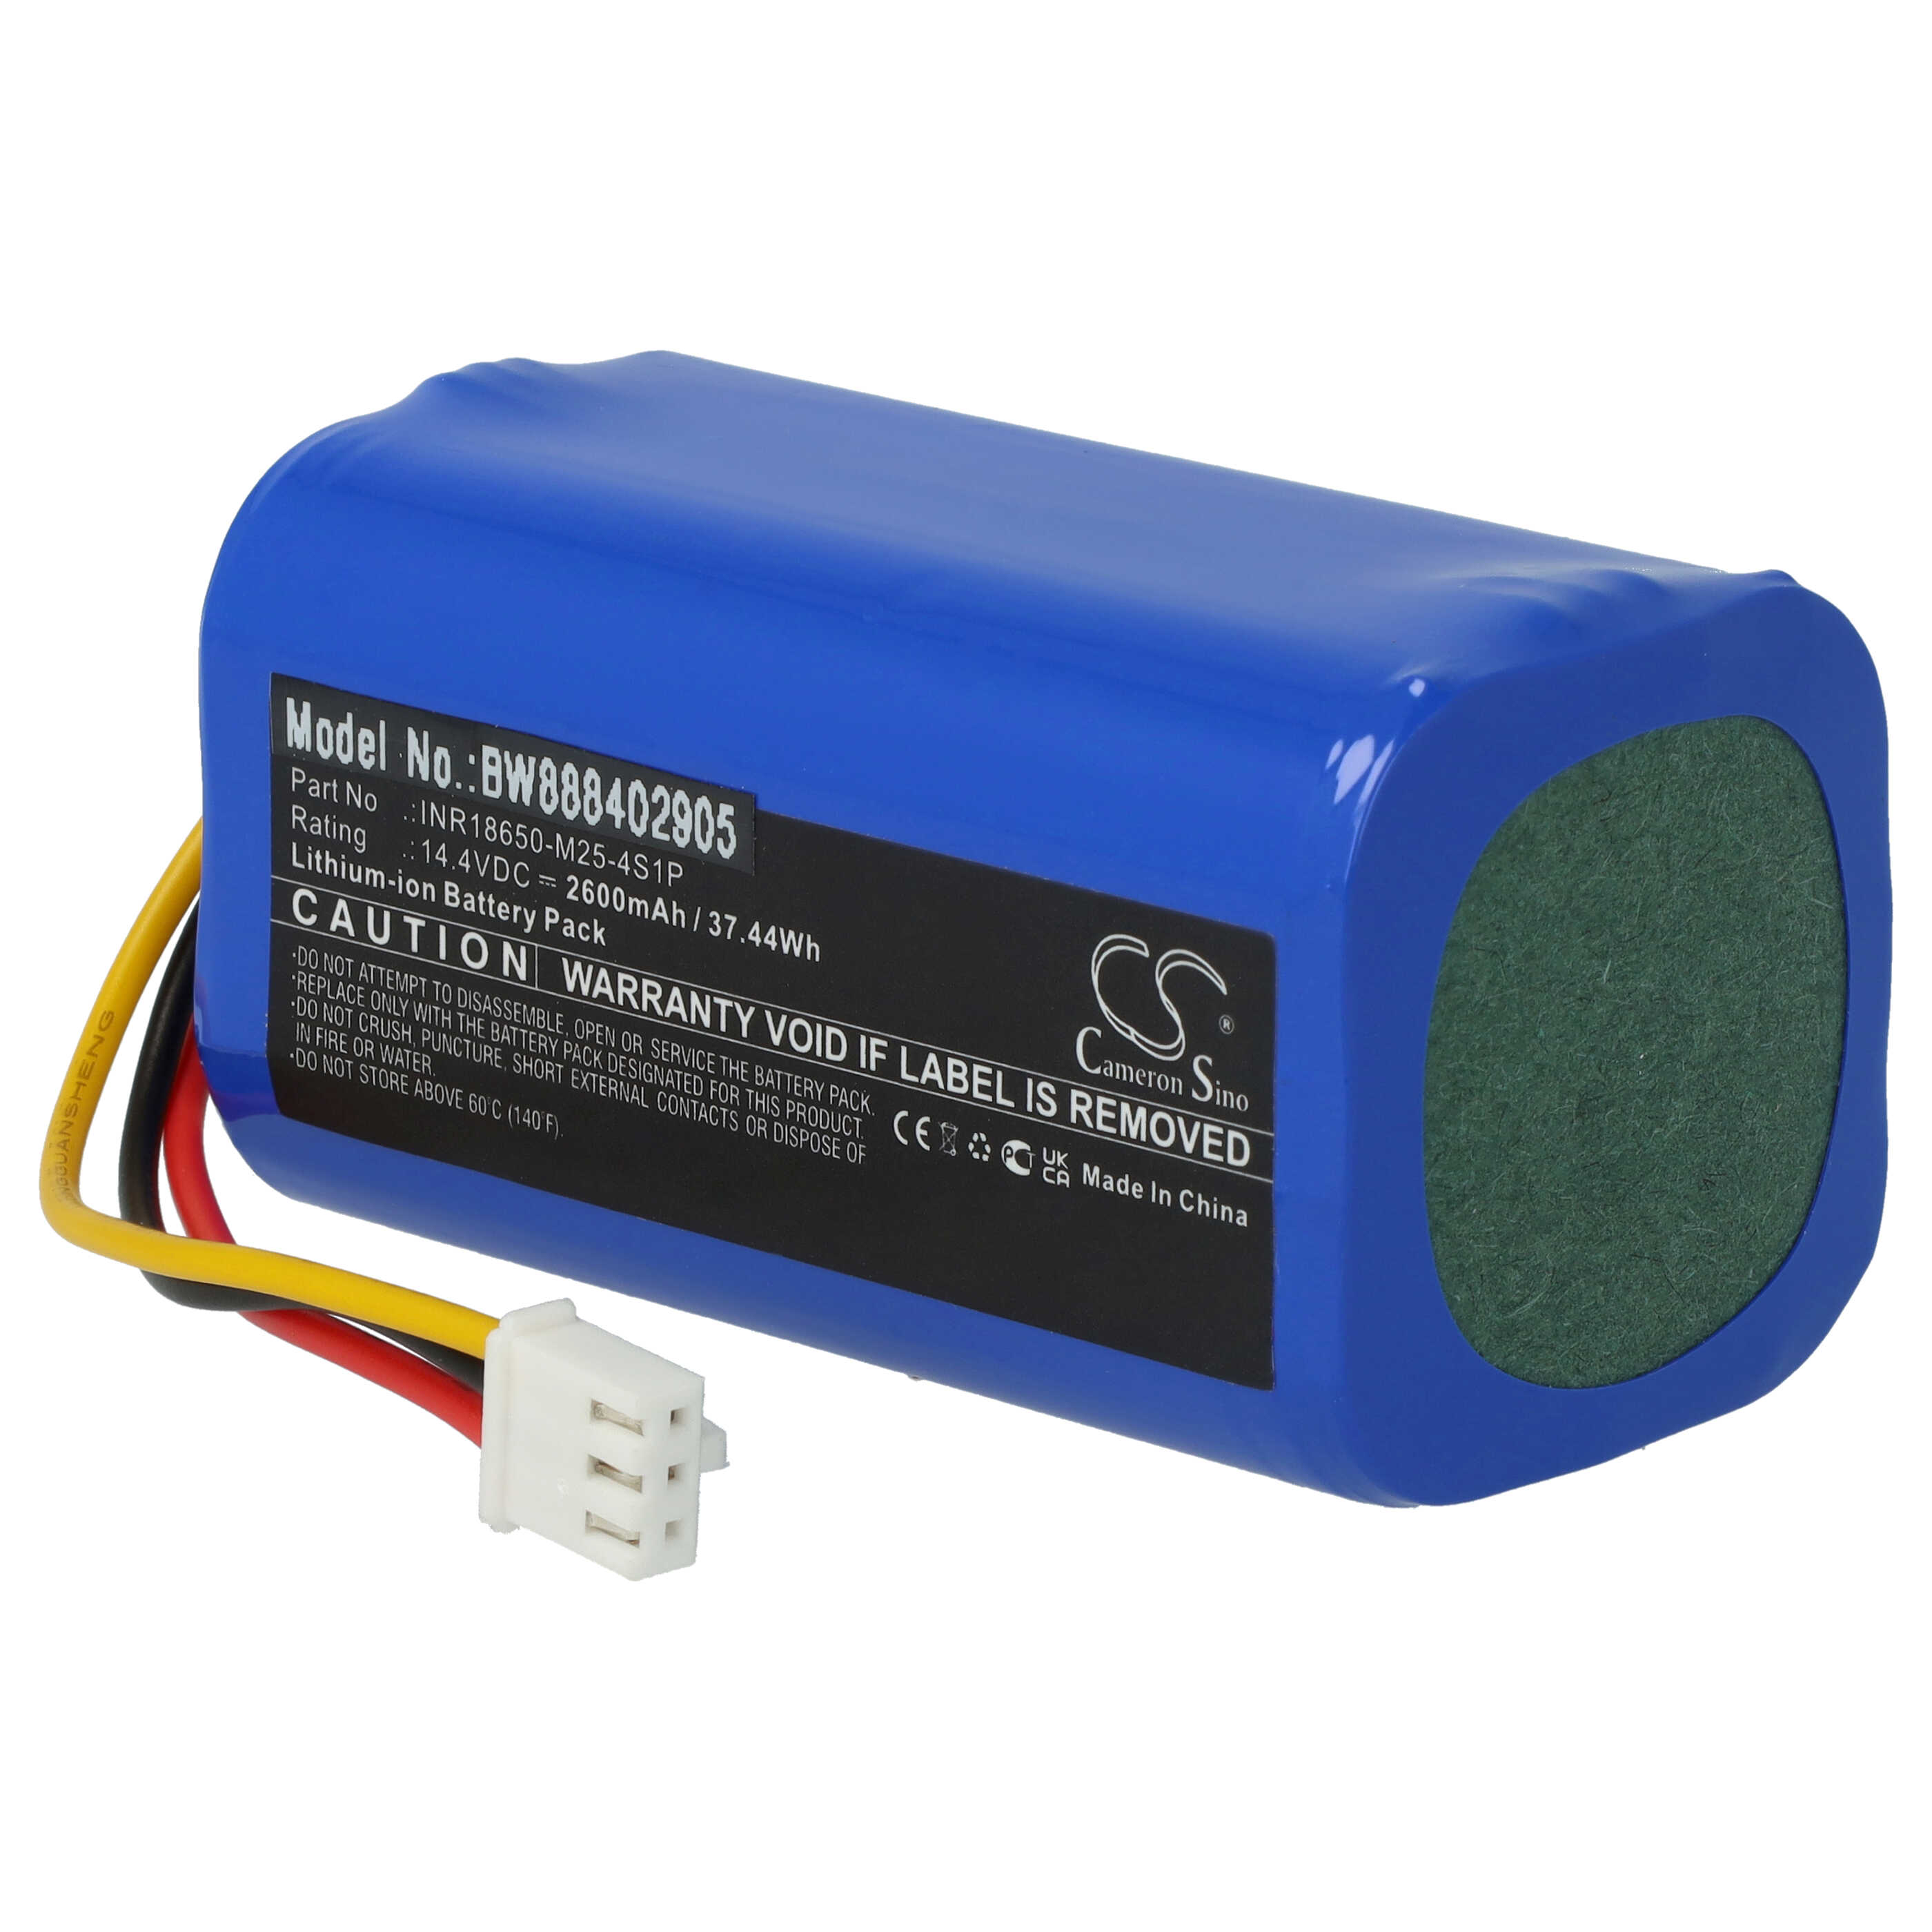 Battery Replacement for Proscenic INR18650-M25-4S1P for - 2600mAh, 14.4V, Li-Ion